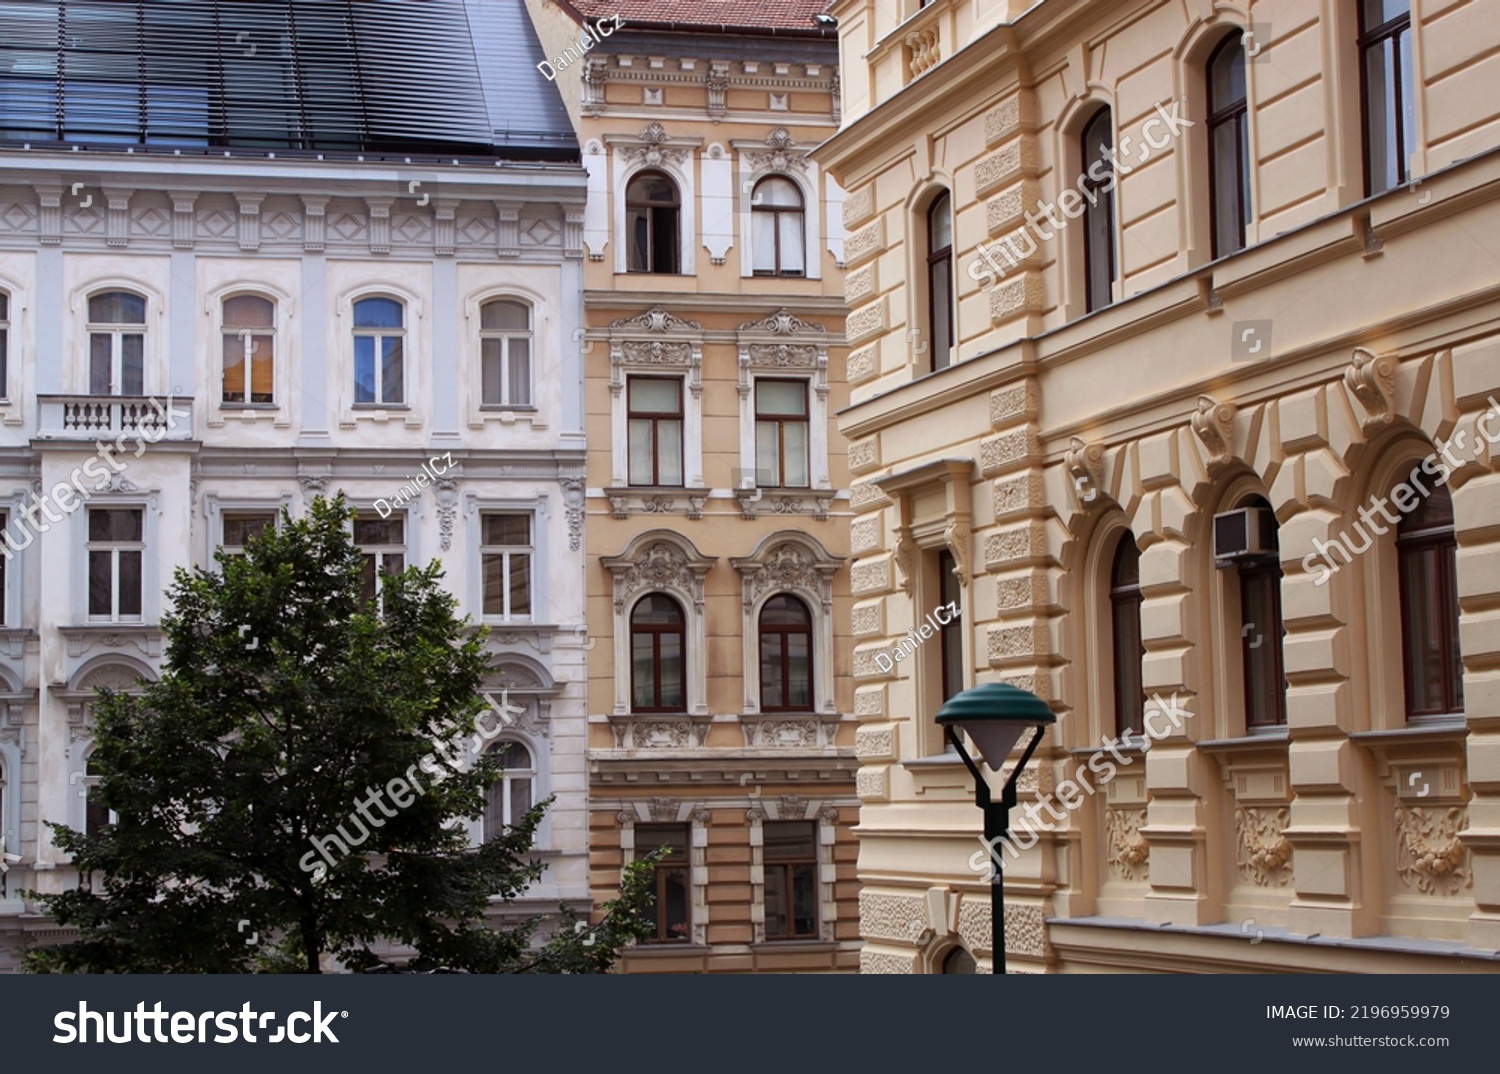 Facade of historical buildings in the old town of Vienna, Austria, Central Europe. Exterior view of heritage houses. Statues, sculptures, figures, ornaments, architectural background. #2196959979